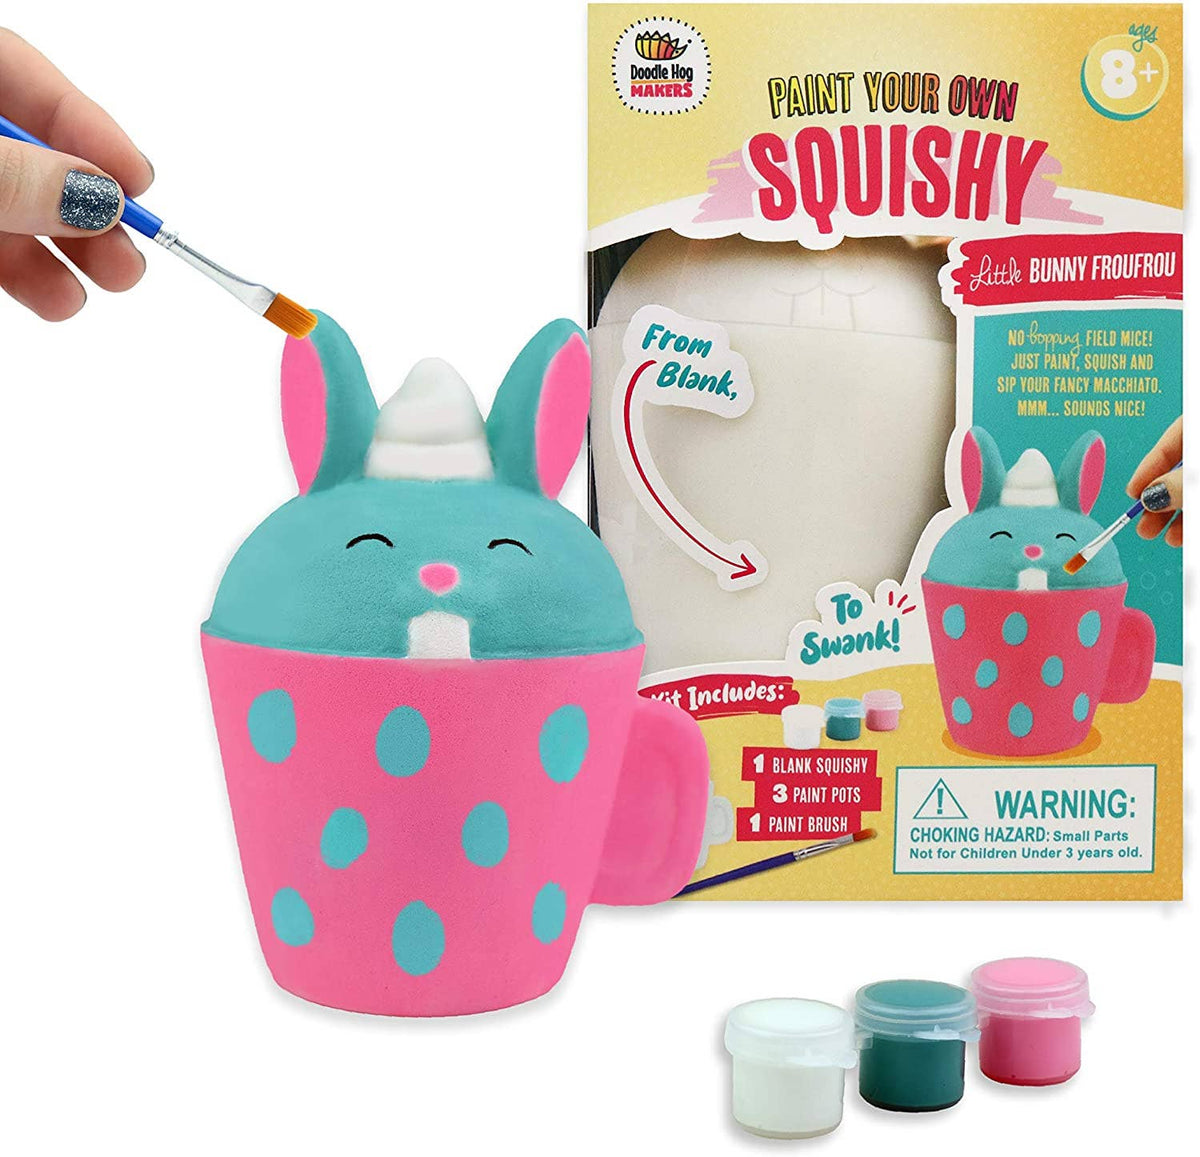 Paint Your Own Squishy Kit: Little Bunny FrouFrou